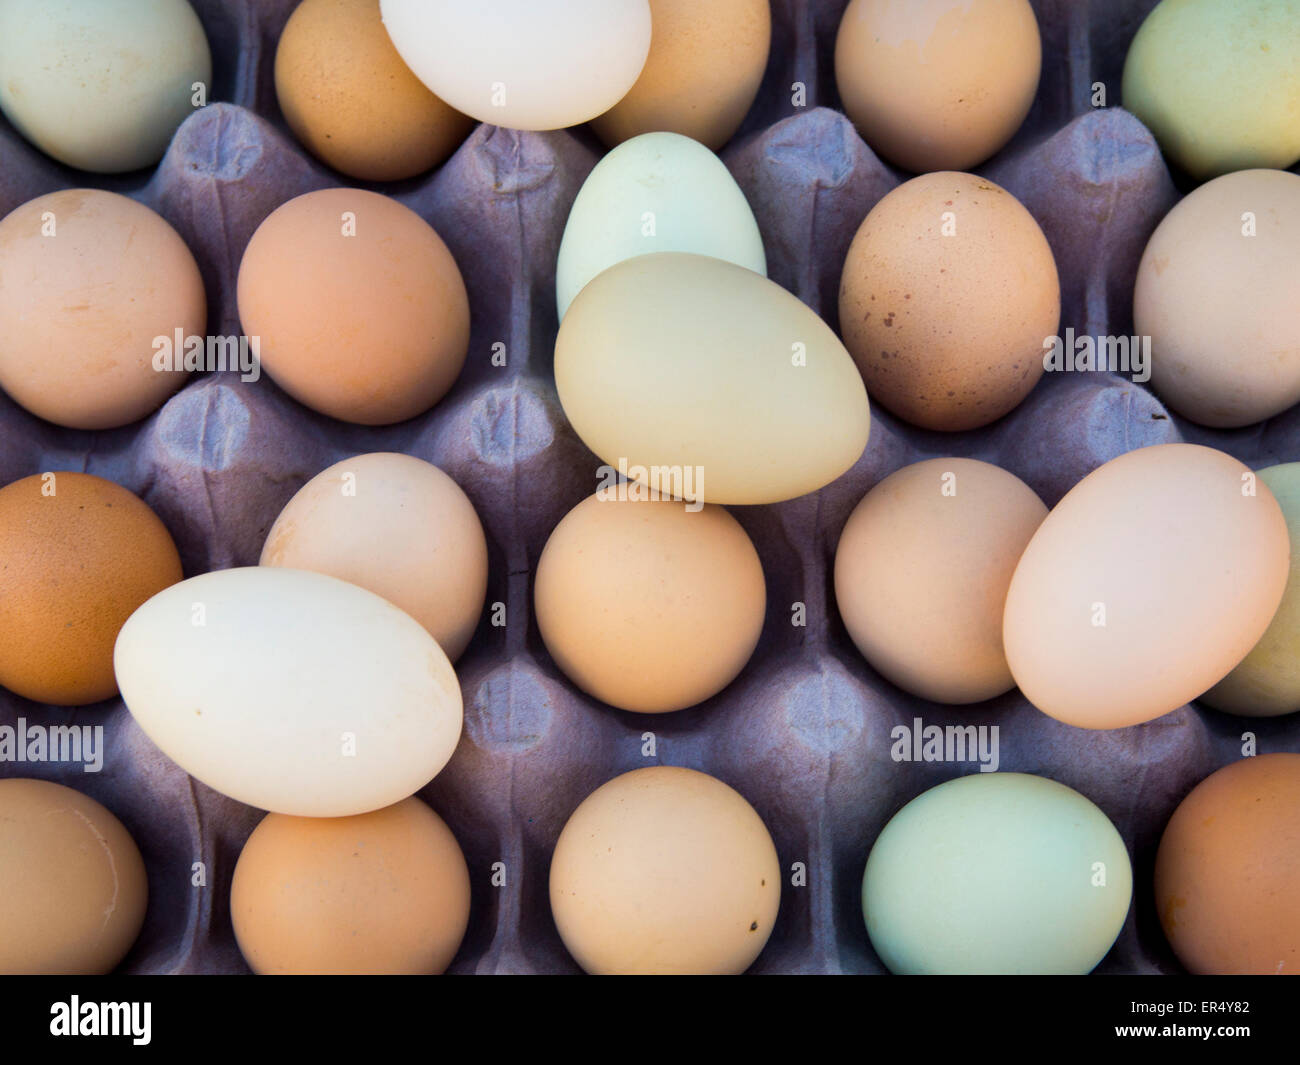 Colorful natural farm fresh hen eggs in an egg crate. Stock Photo